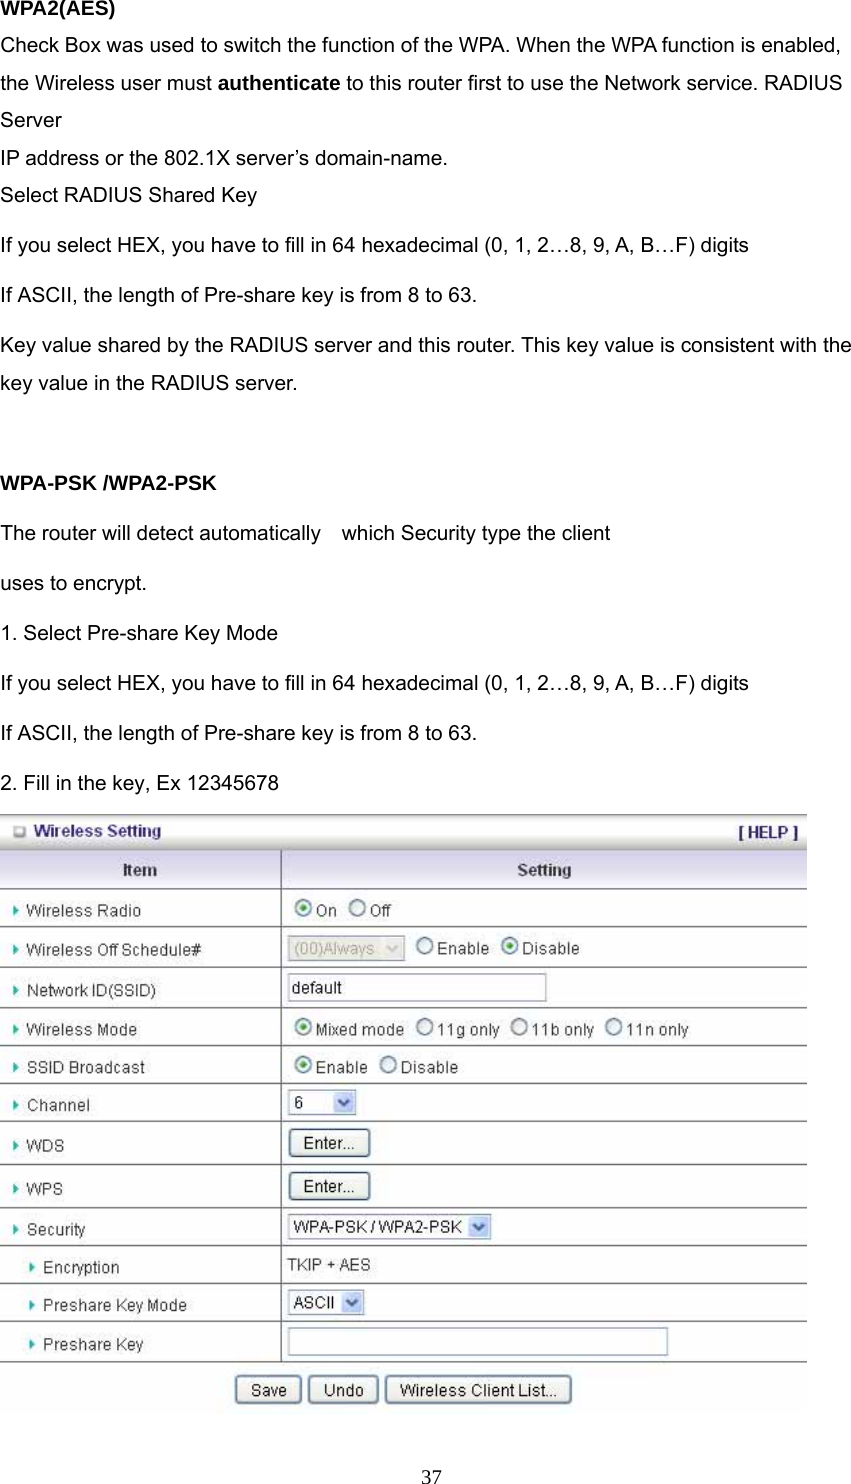  37WPA2(AES) Check Box was used to switch the function of the WPA. When the WPA function is enabled, the Wireless user must authenticate to this router first to use the Network service. RADIUS Server IP address or the 802.1X server’s domain-name.   Select RADIUS Shared Key If you select HEX, you have to fill in 64 hexadecimal (0, 1, 2…8, 9, A, B…F) digits If ASCII, the length of Pre-share key is from 8 to 63. Key value shared by the RADIUS server and this router. This key value is consistent with the key value in the RADIUS server.  WPA-PSK /WPA2-PSK The router will detect automatically    which Security type the client   uses to encrypt. 1. Select Pre-share Key Mode If you select HEX, you have to fill in 64 hexadecimal (0, 1, 2…8, 9, A, B…F) digits If ASCII, the length of Pre-share key is from 8 to 63. 2. Fill in the key, Ex 12345678  